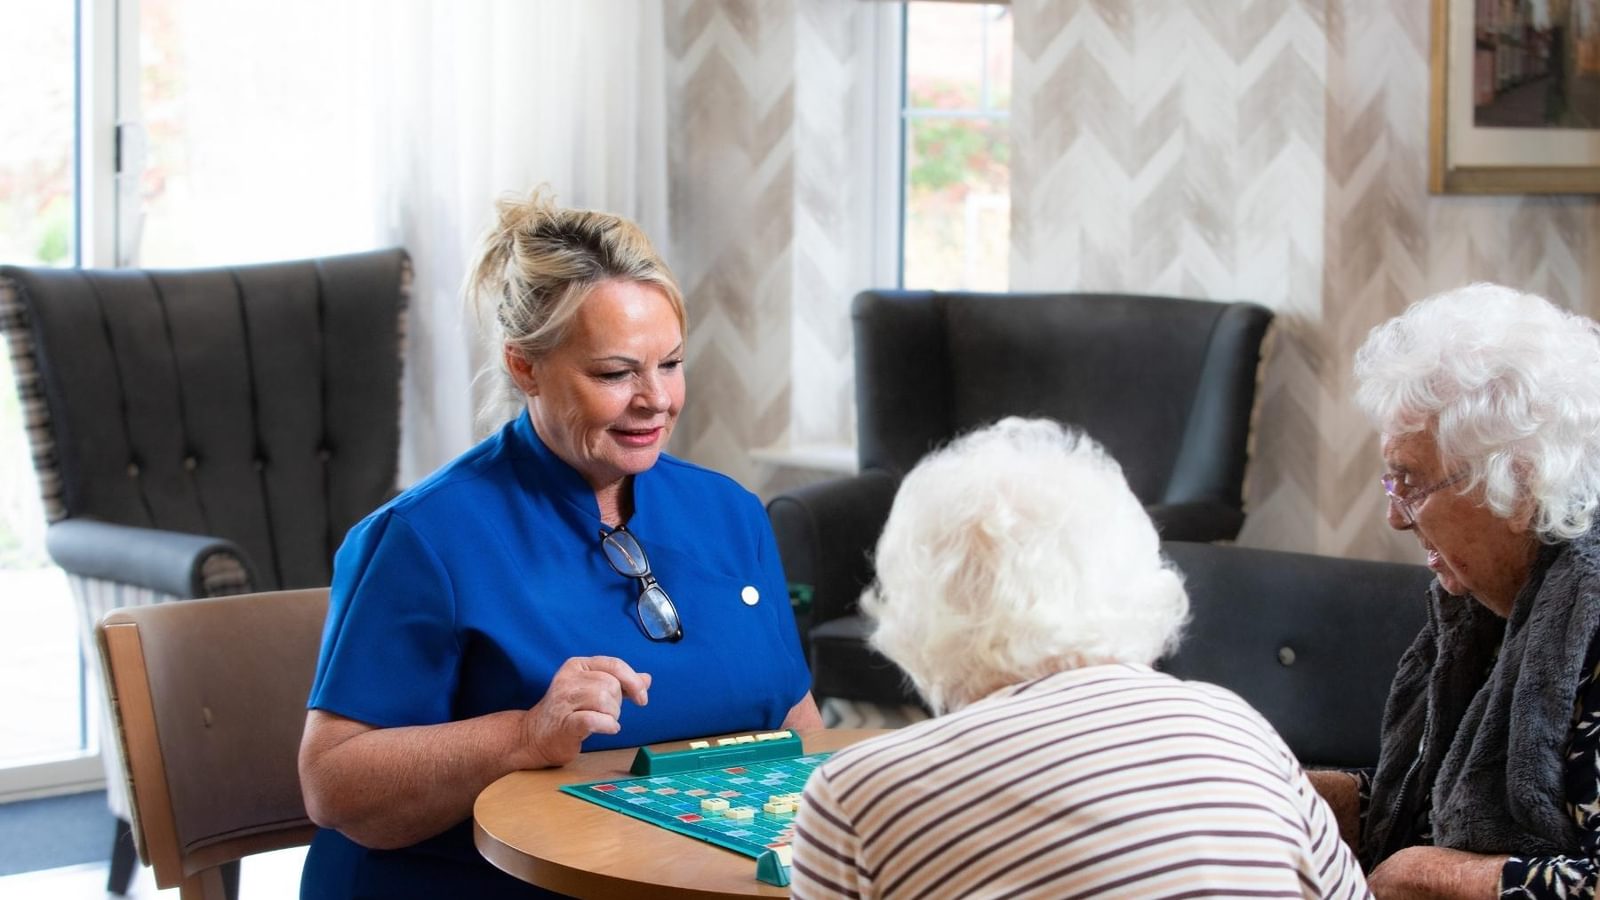 Nurse playing a board game with residents in the lounge